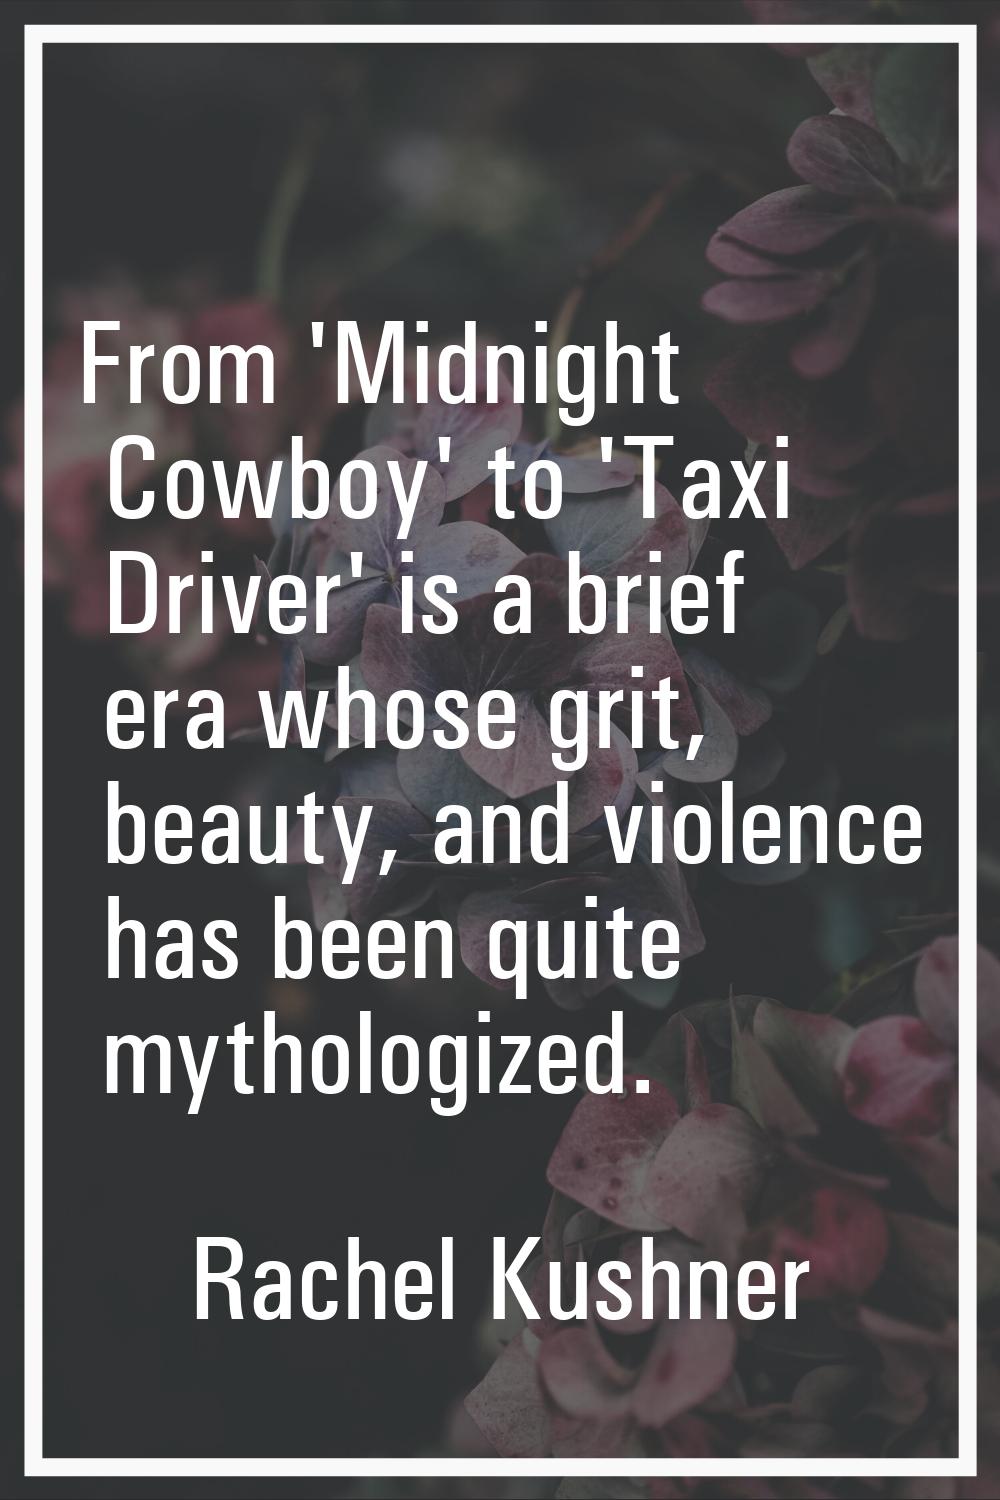 From 'Midnight Cowboy' to 'Taxi Driver' is a brief era whose grit, beauty, and violence has been qu